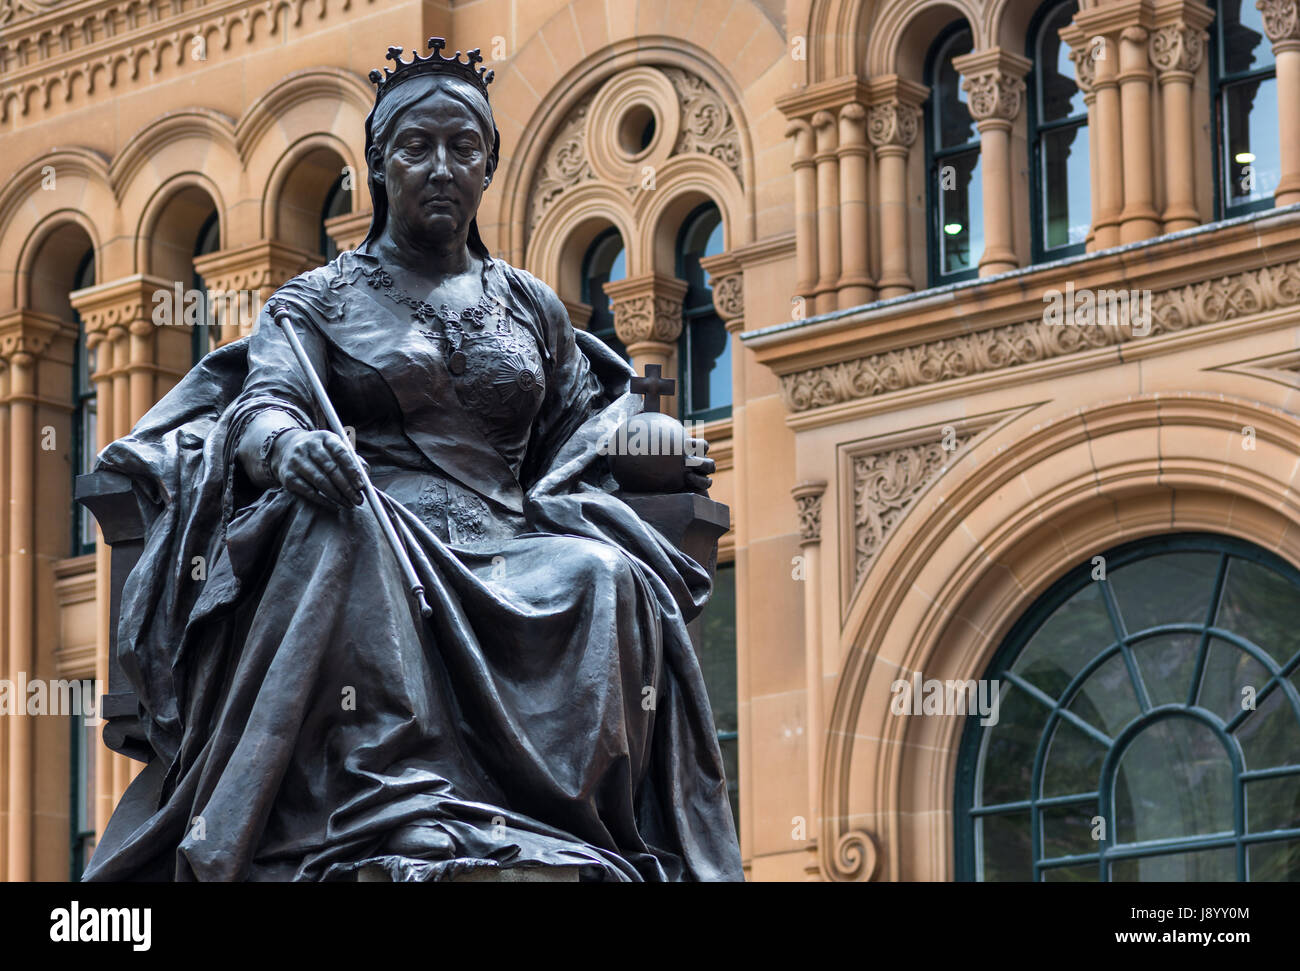 Queen Victoria statue and building, Sydney, New South Wales, Australia. Stock Photo